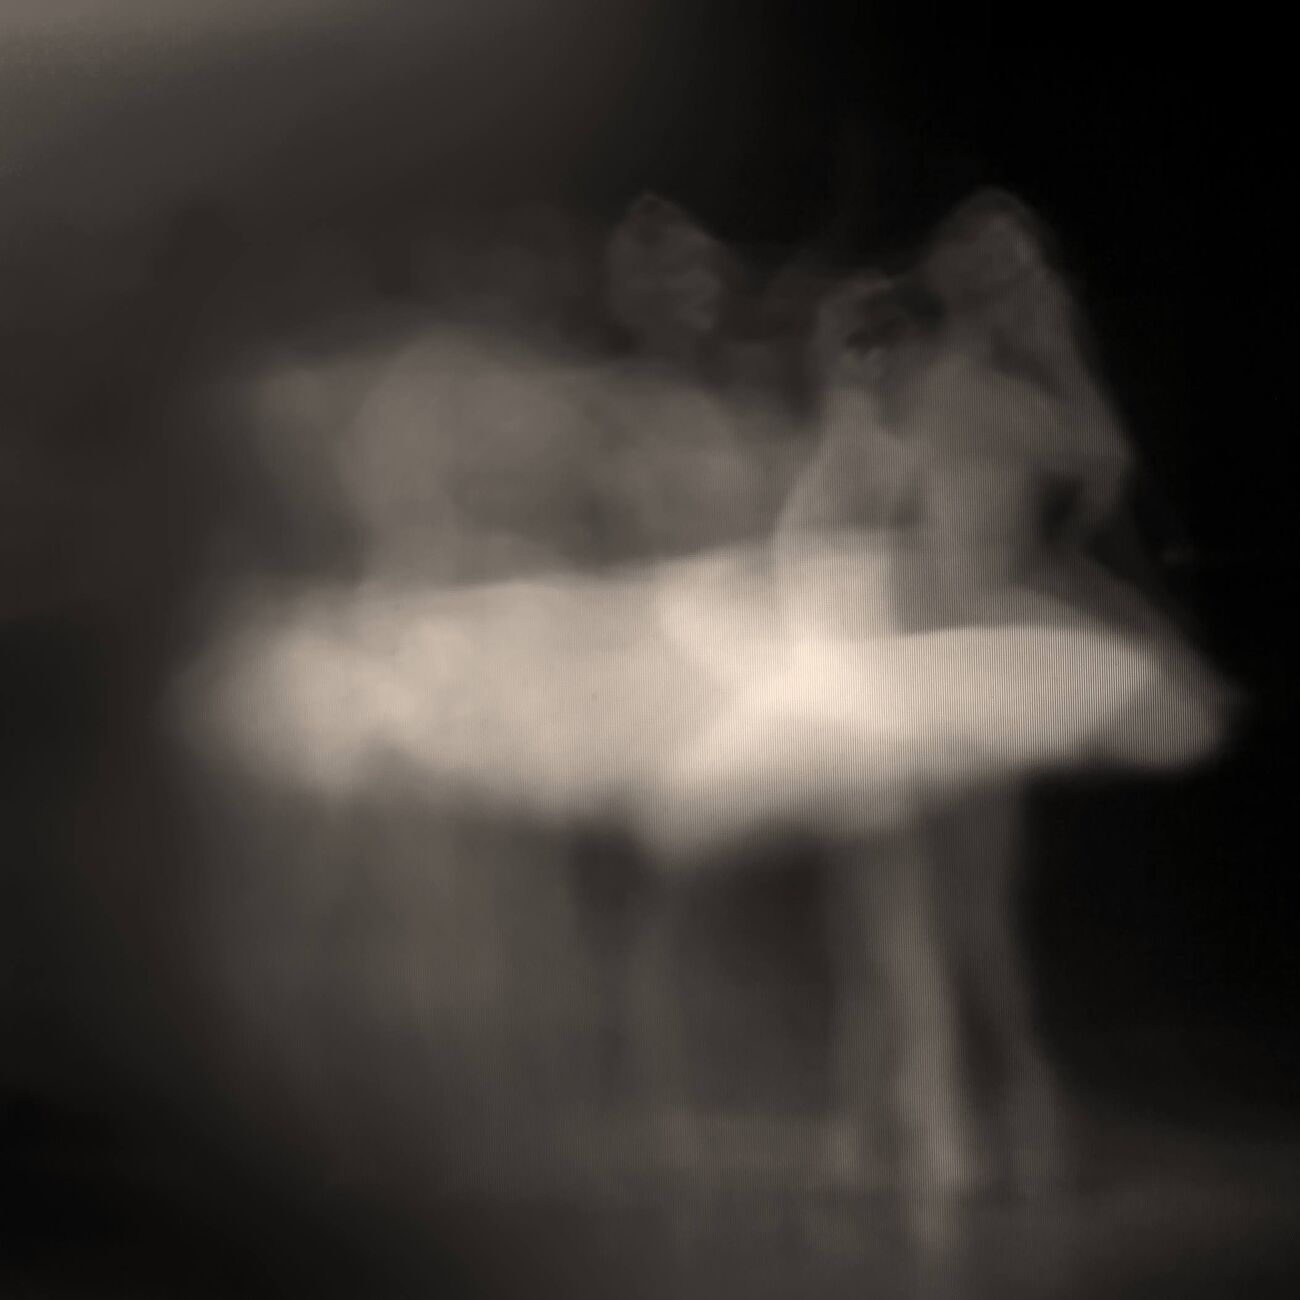 Ghots Opera, Study 33, The Swan Lake, Berlin, Allemagne. Avril 1998. Ref-11469 - Denis Olivier Photographie